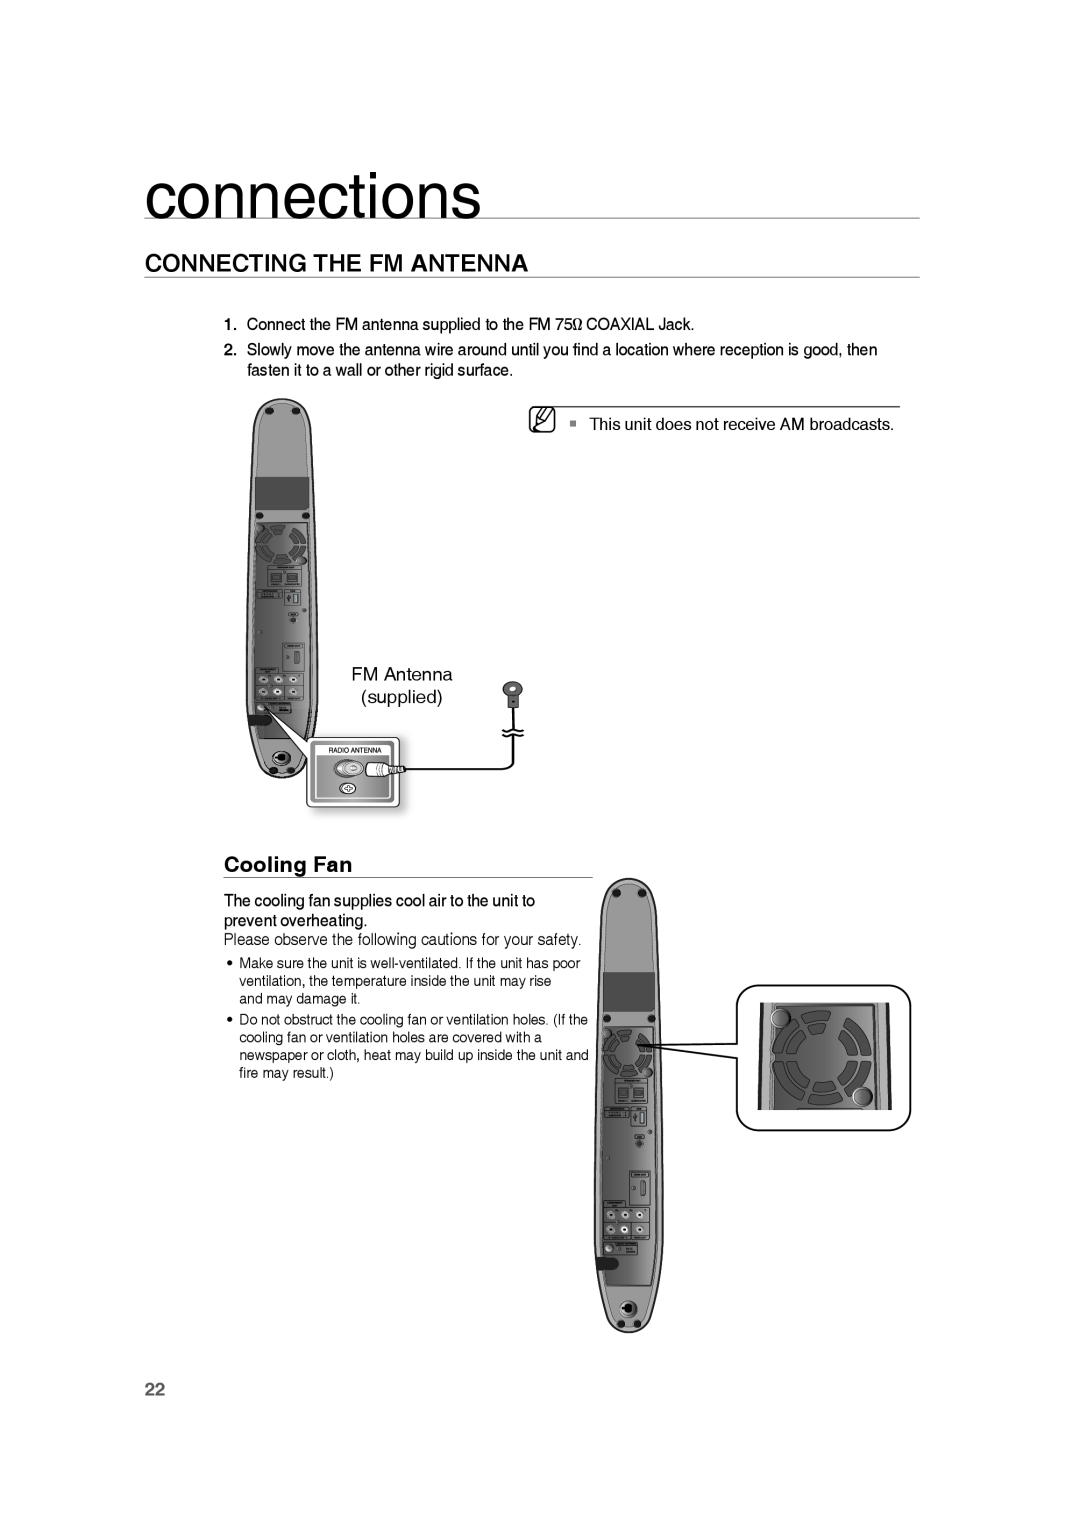 Samsung HE10T user manual Connecting The Fm Antenna, Cooling Fan, connections 